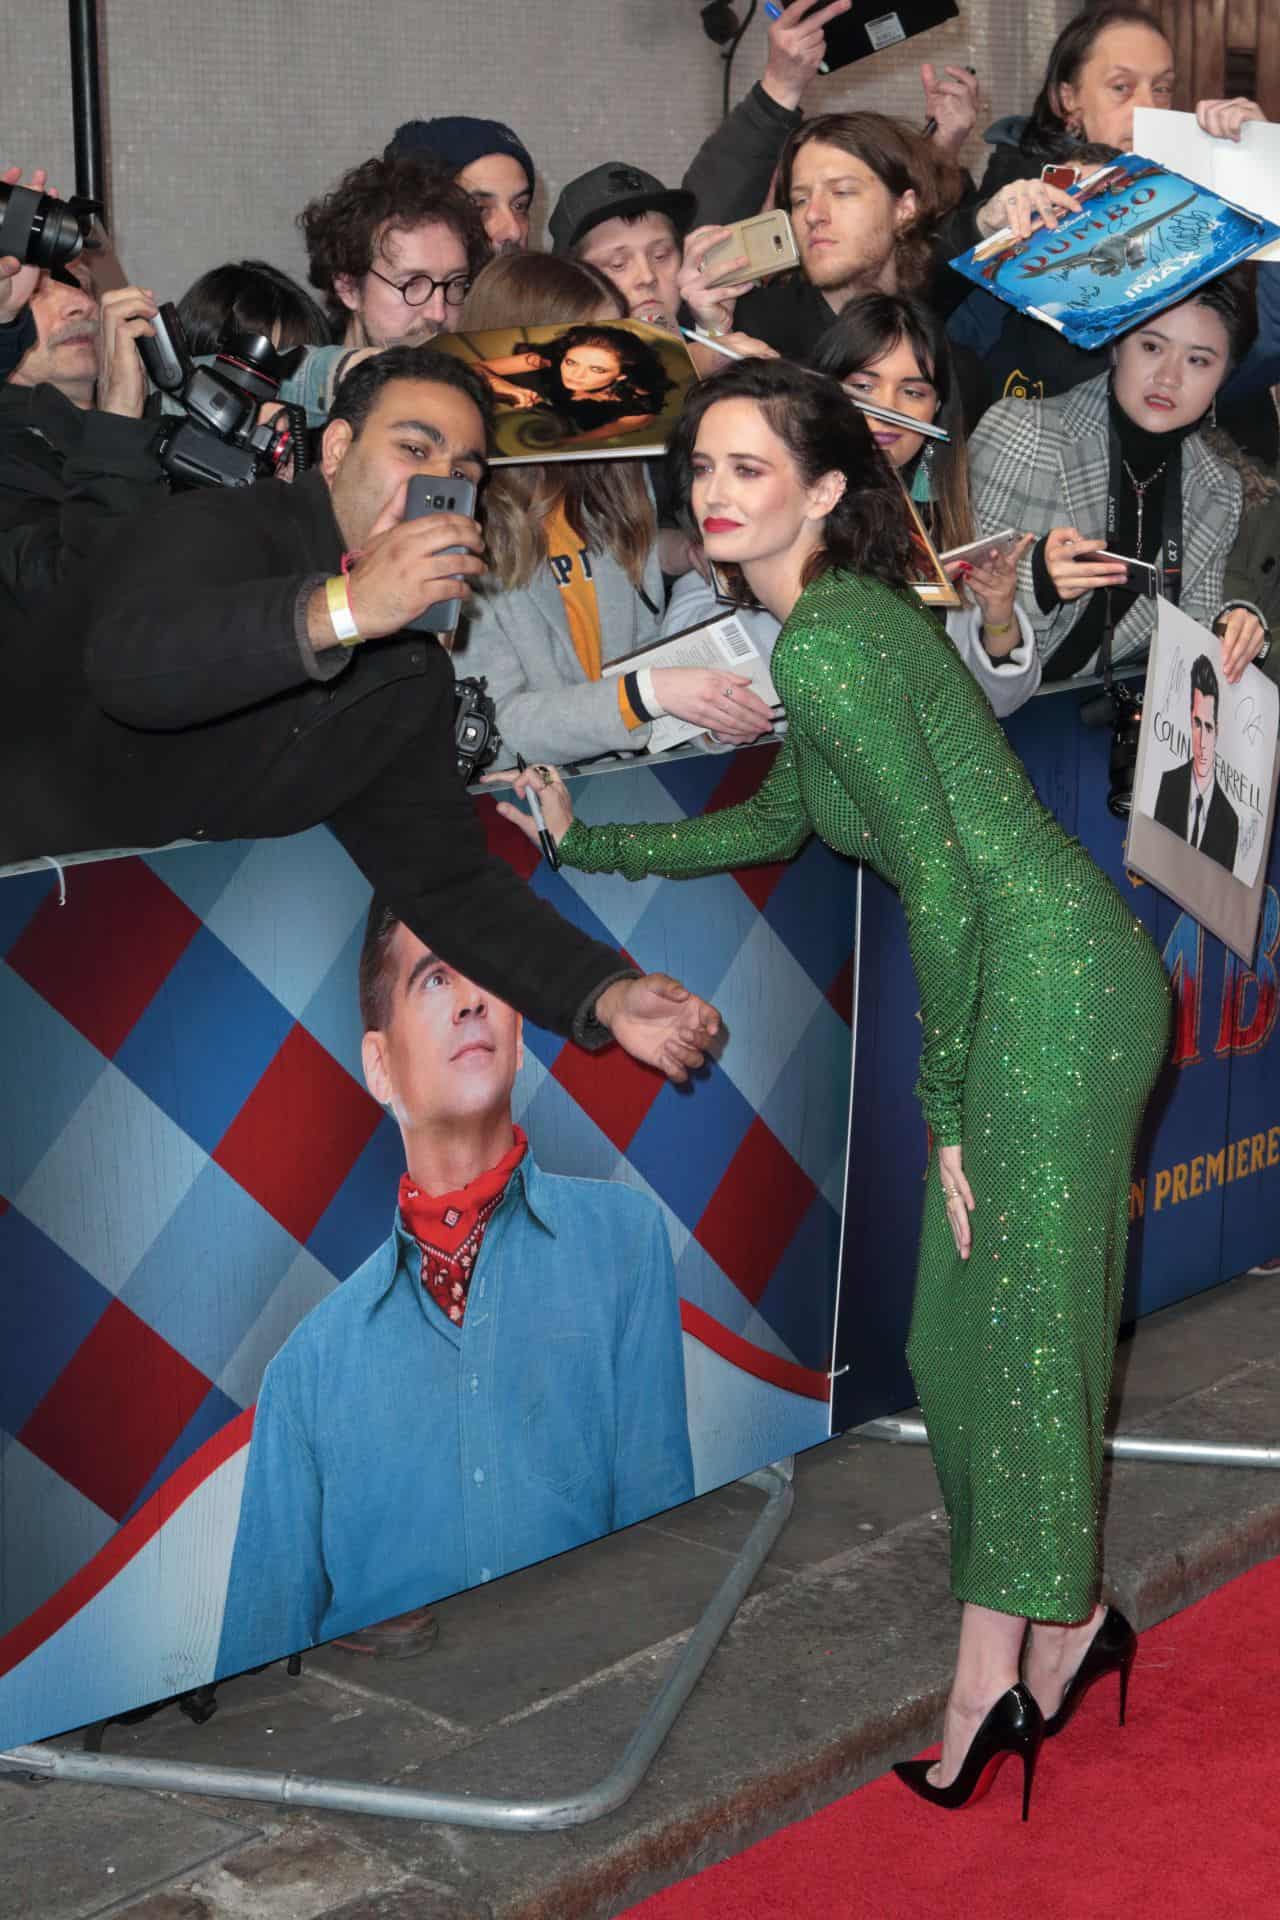 Eva Green Lights Up the Red Carpet in Emerald Green Gown